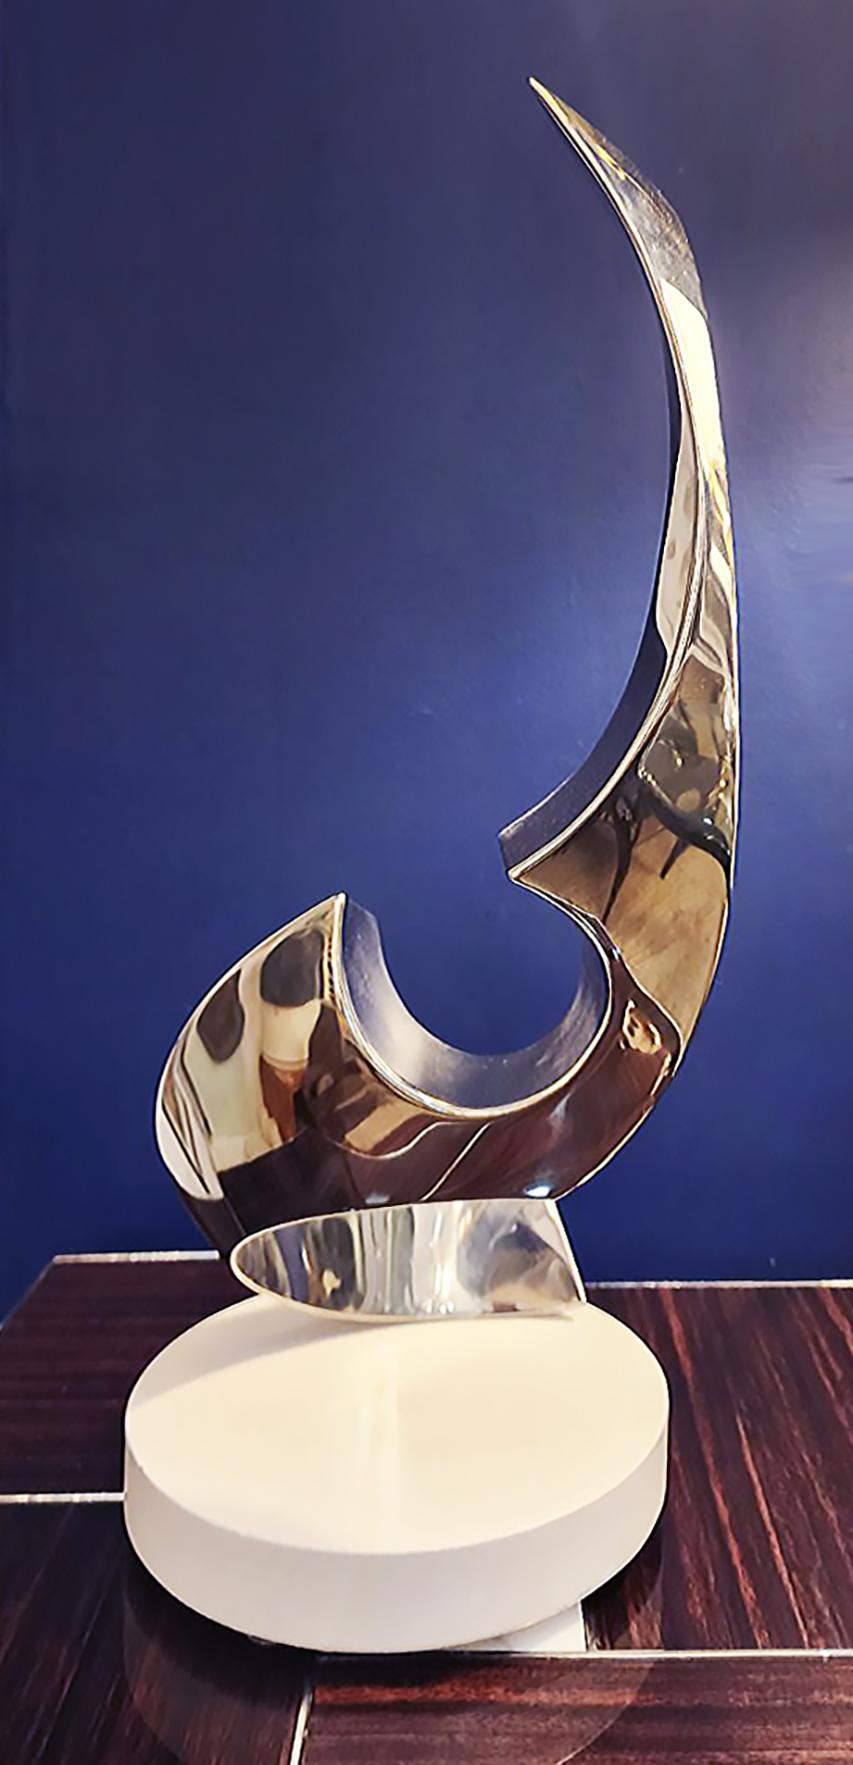 Todd Reuben chrome abstract sculpture on rotating base

Offered for sale is an original abstract sculpture by the American artist from Vermont, Todd Reuben (b. 1956), The sculpture is titled 